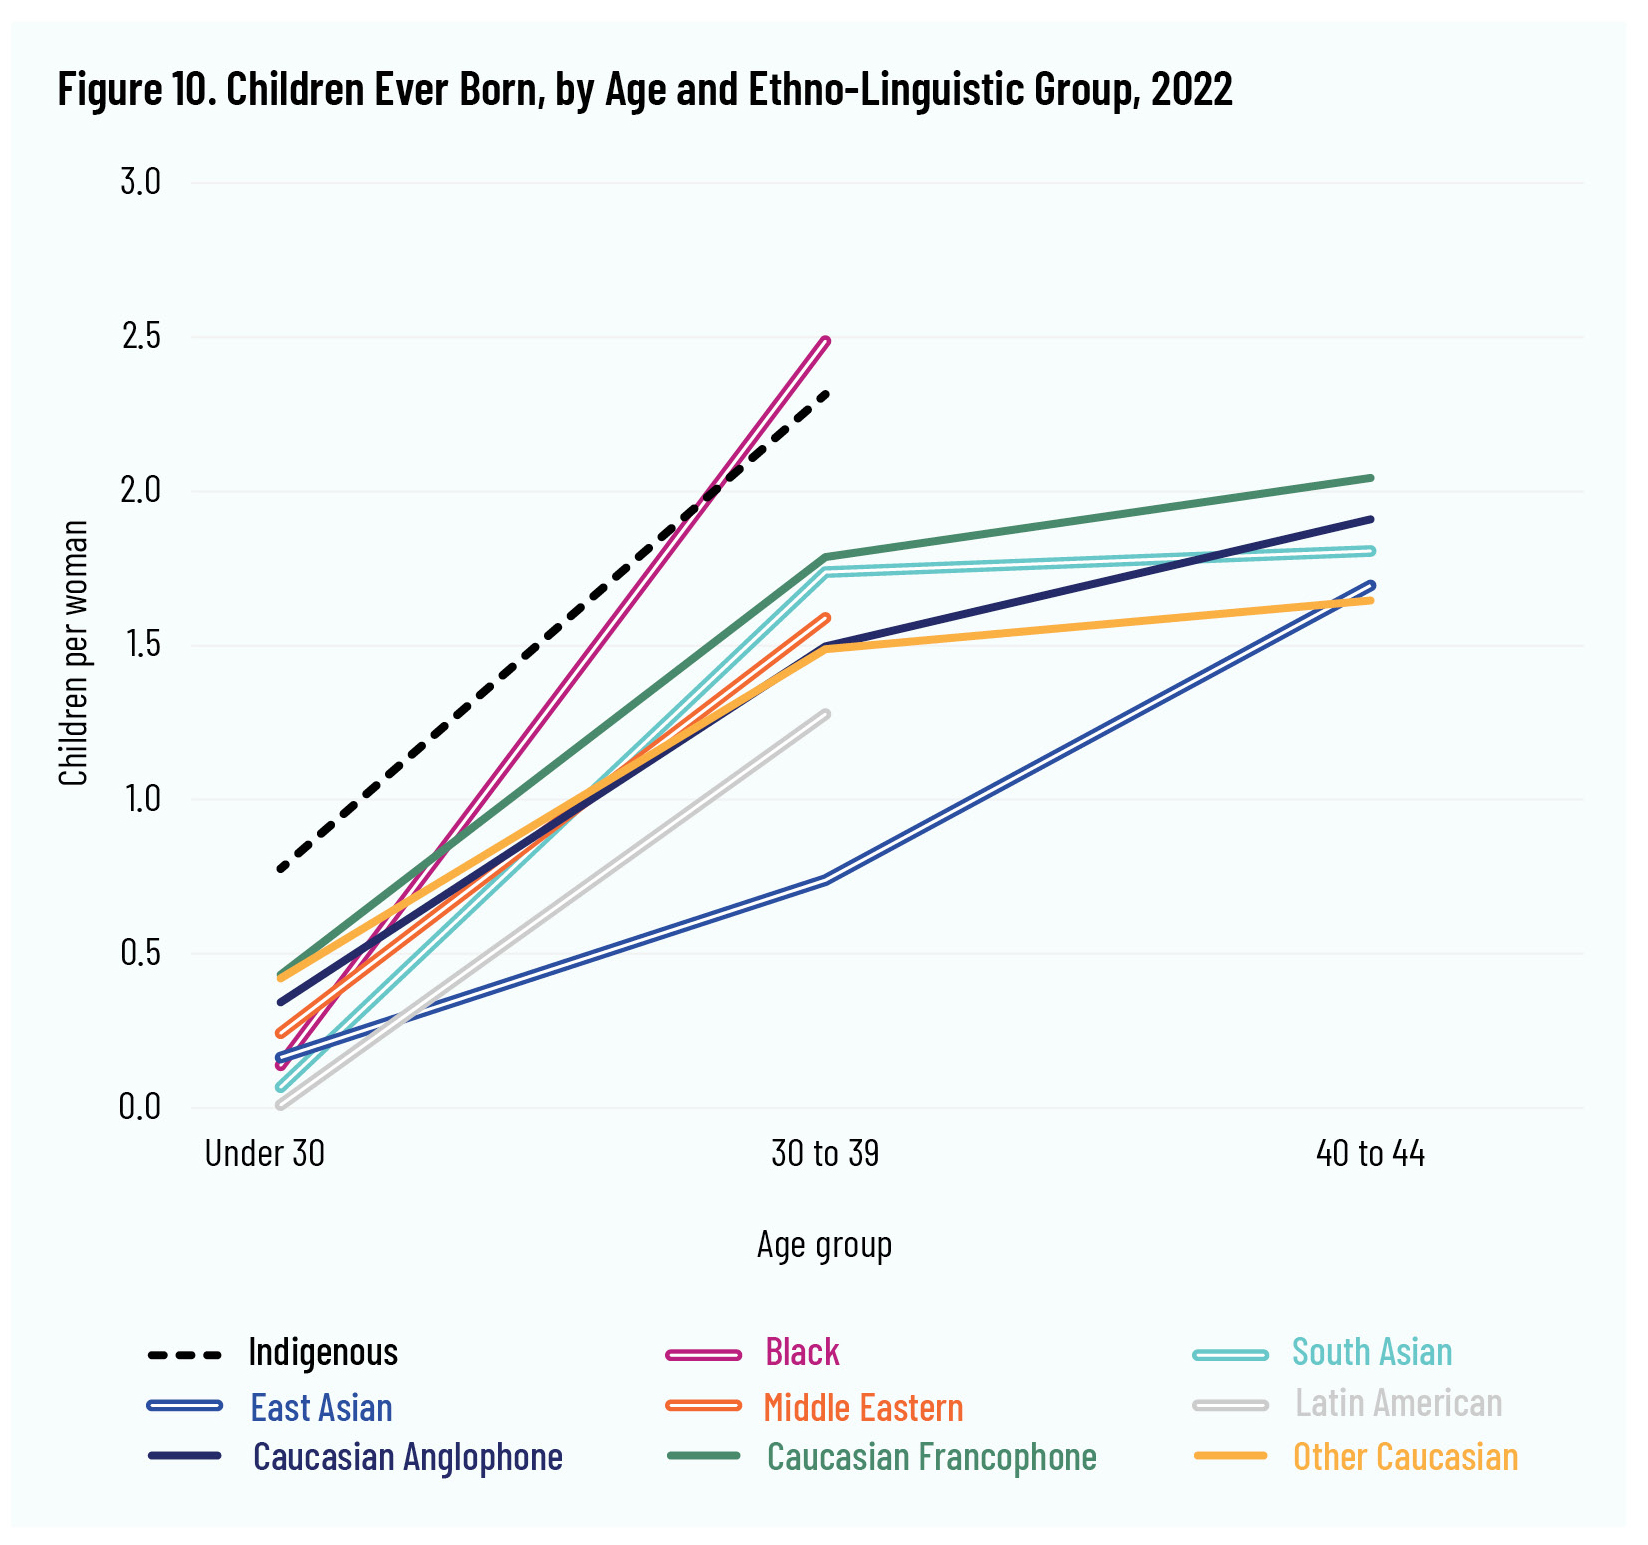 Figure 10. Children Ever Born, by Age and Ethno-Linguistic Group, 2022